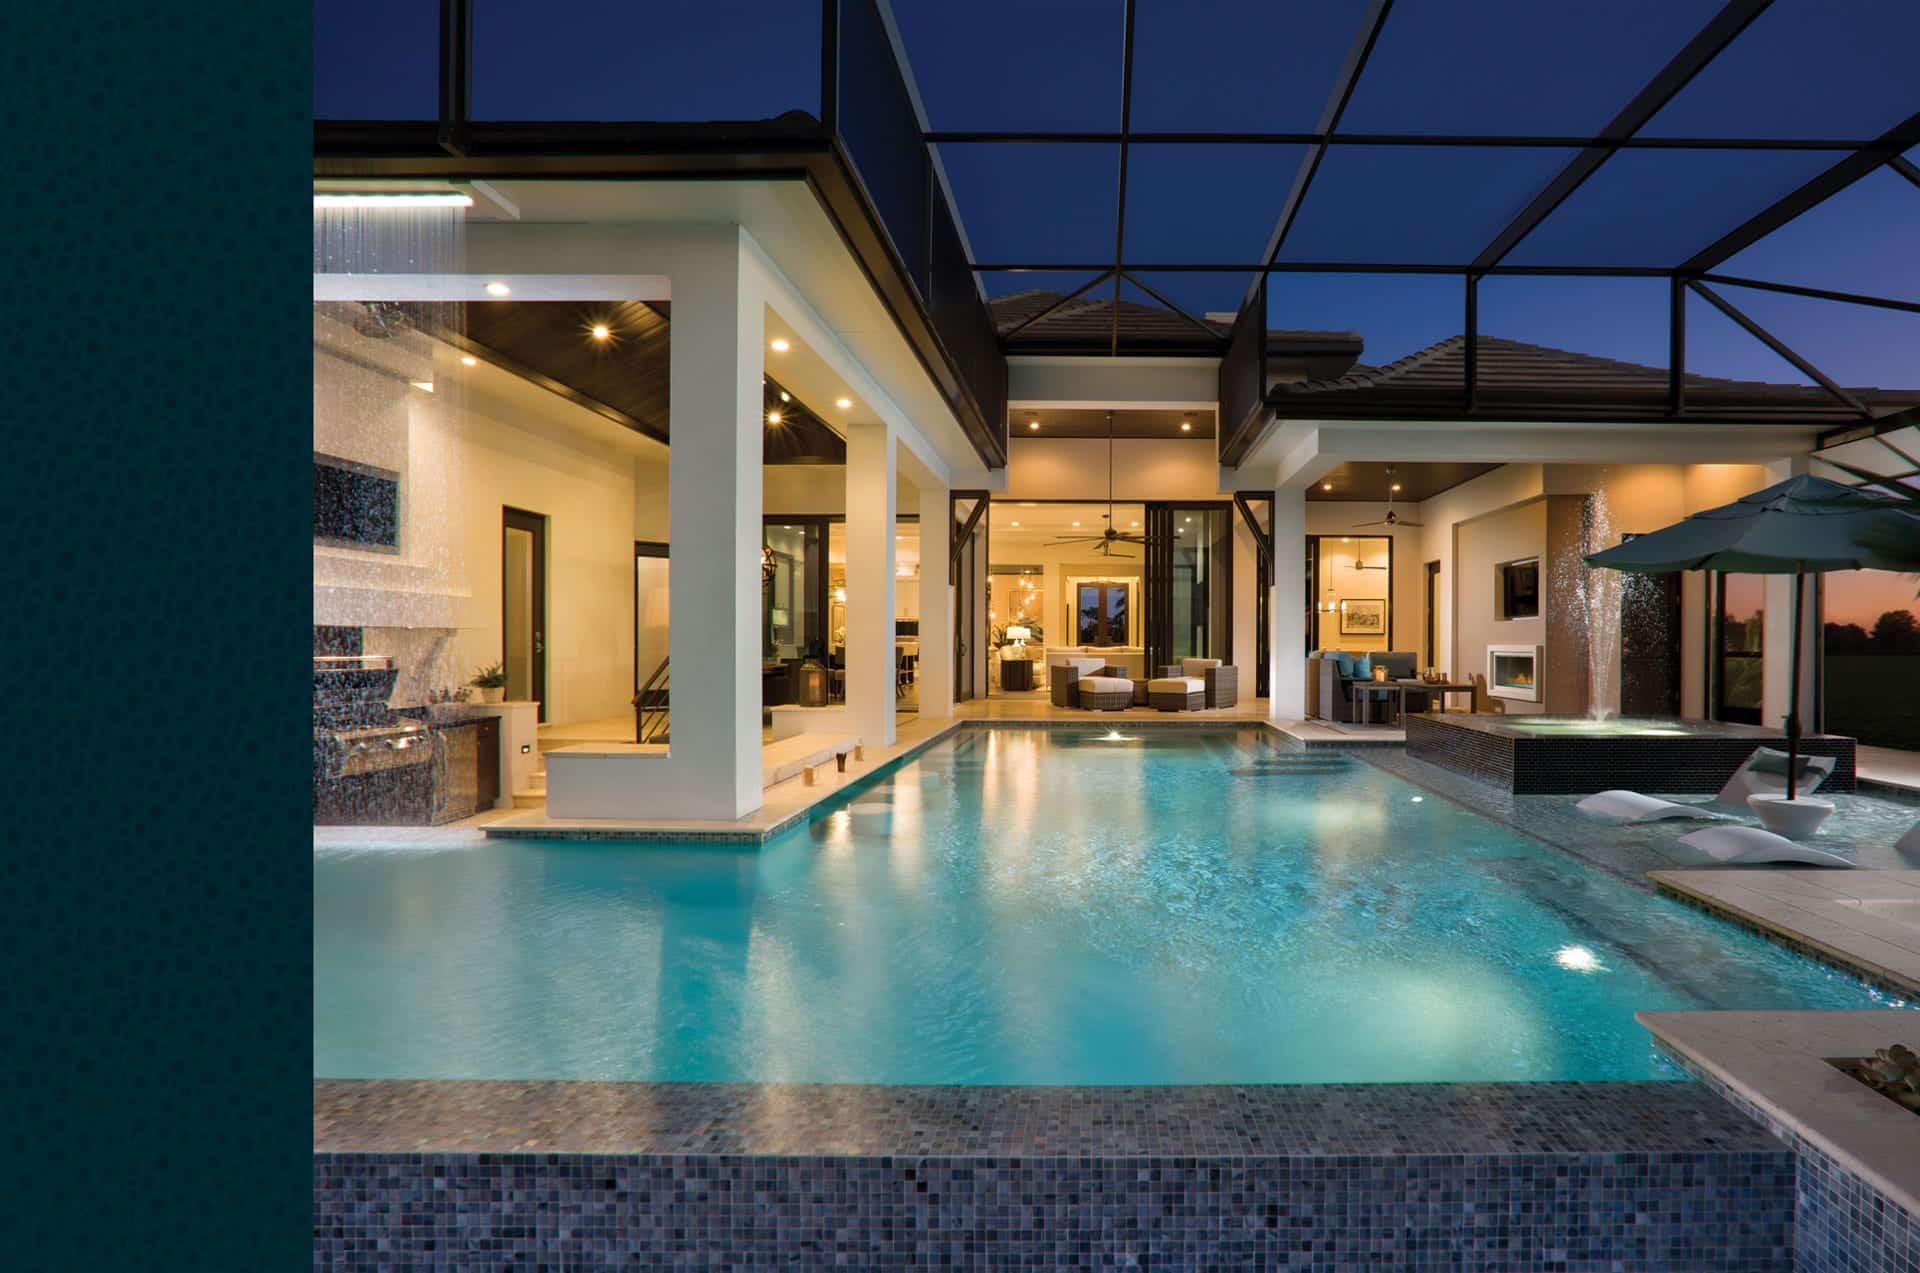 Andalucia model home pool at night with lanai and outdoor kitchen